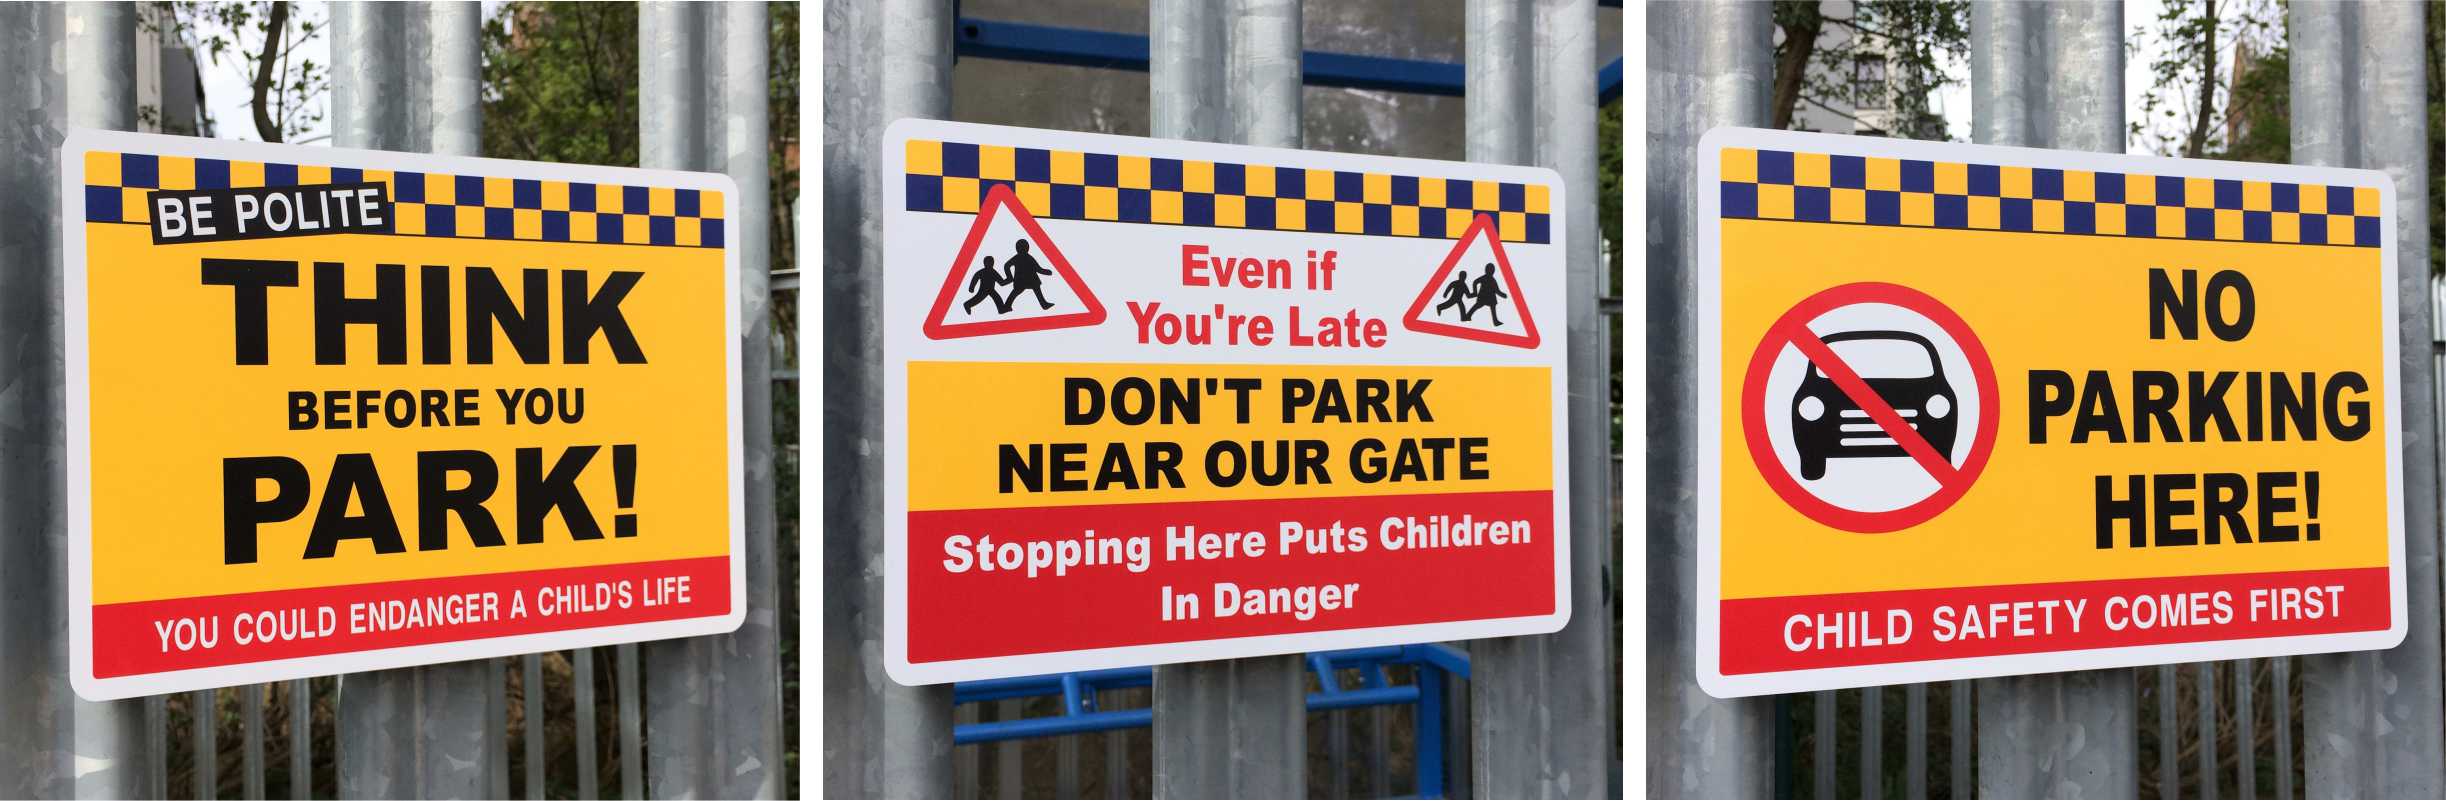 School No Parking Safety Signs